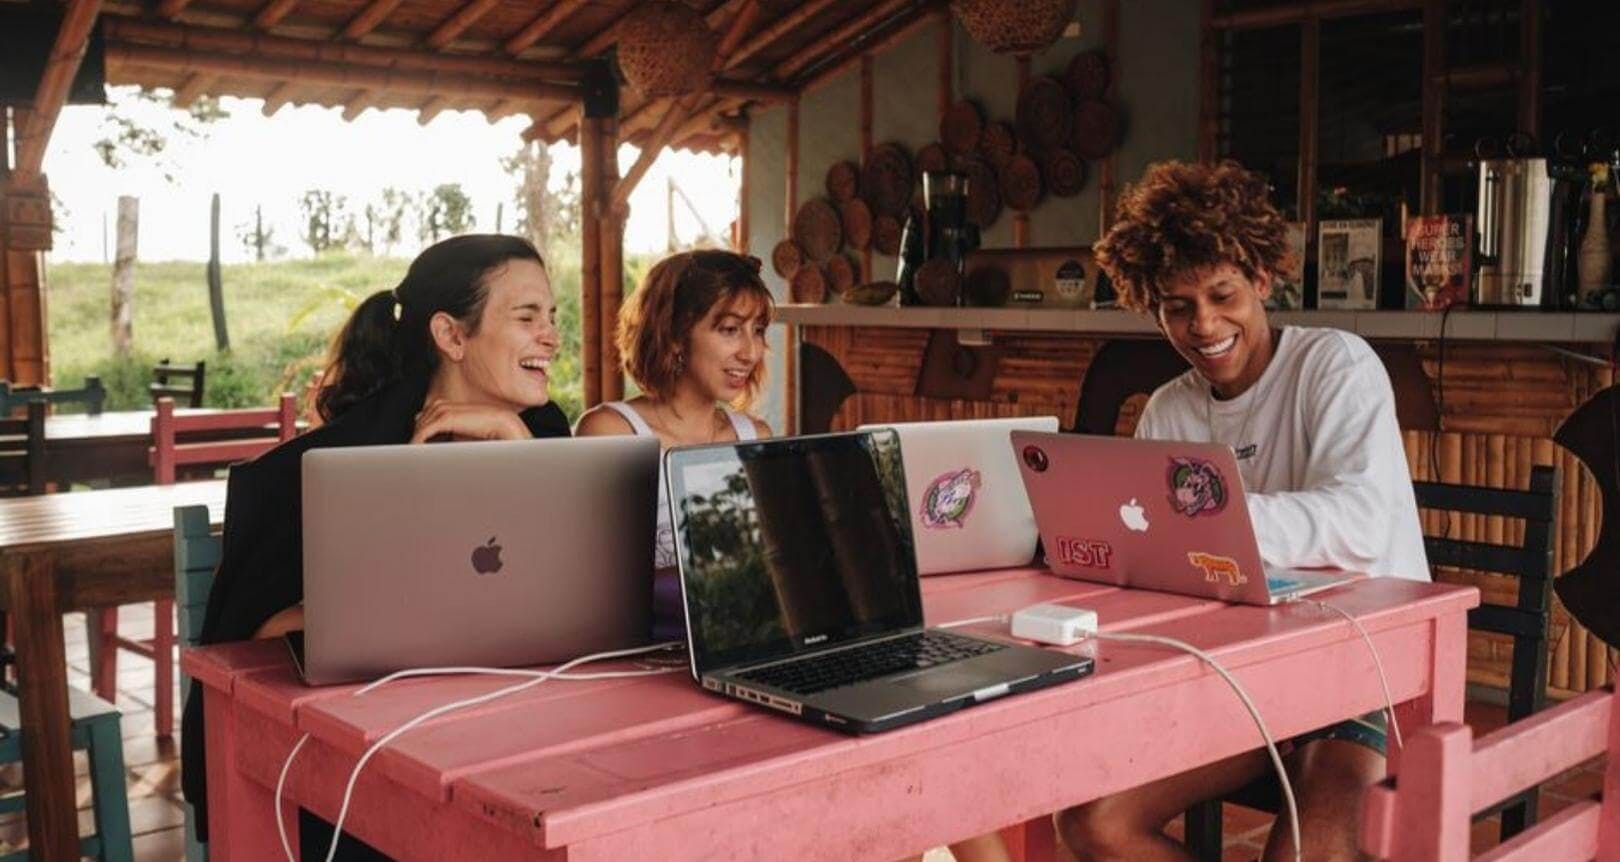 3 people working remotely from a hut in guatemala 